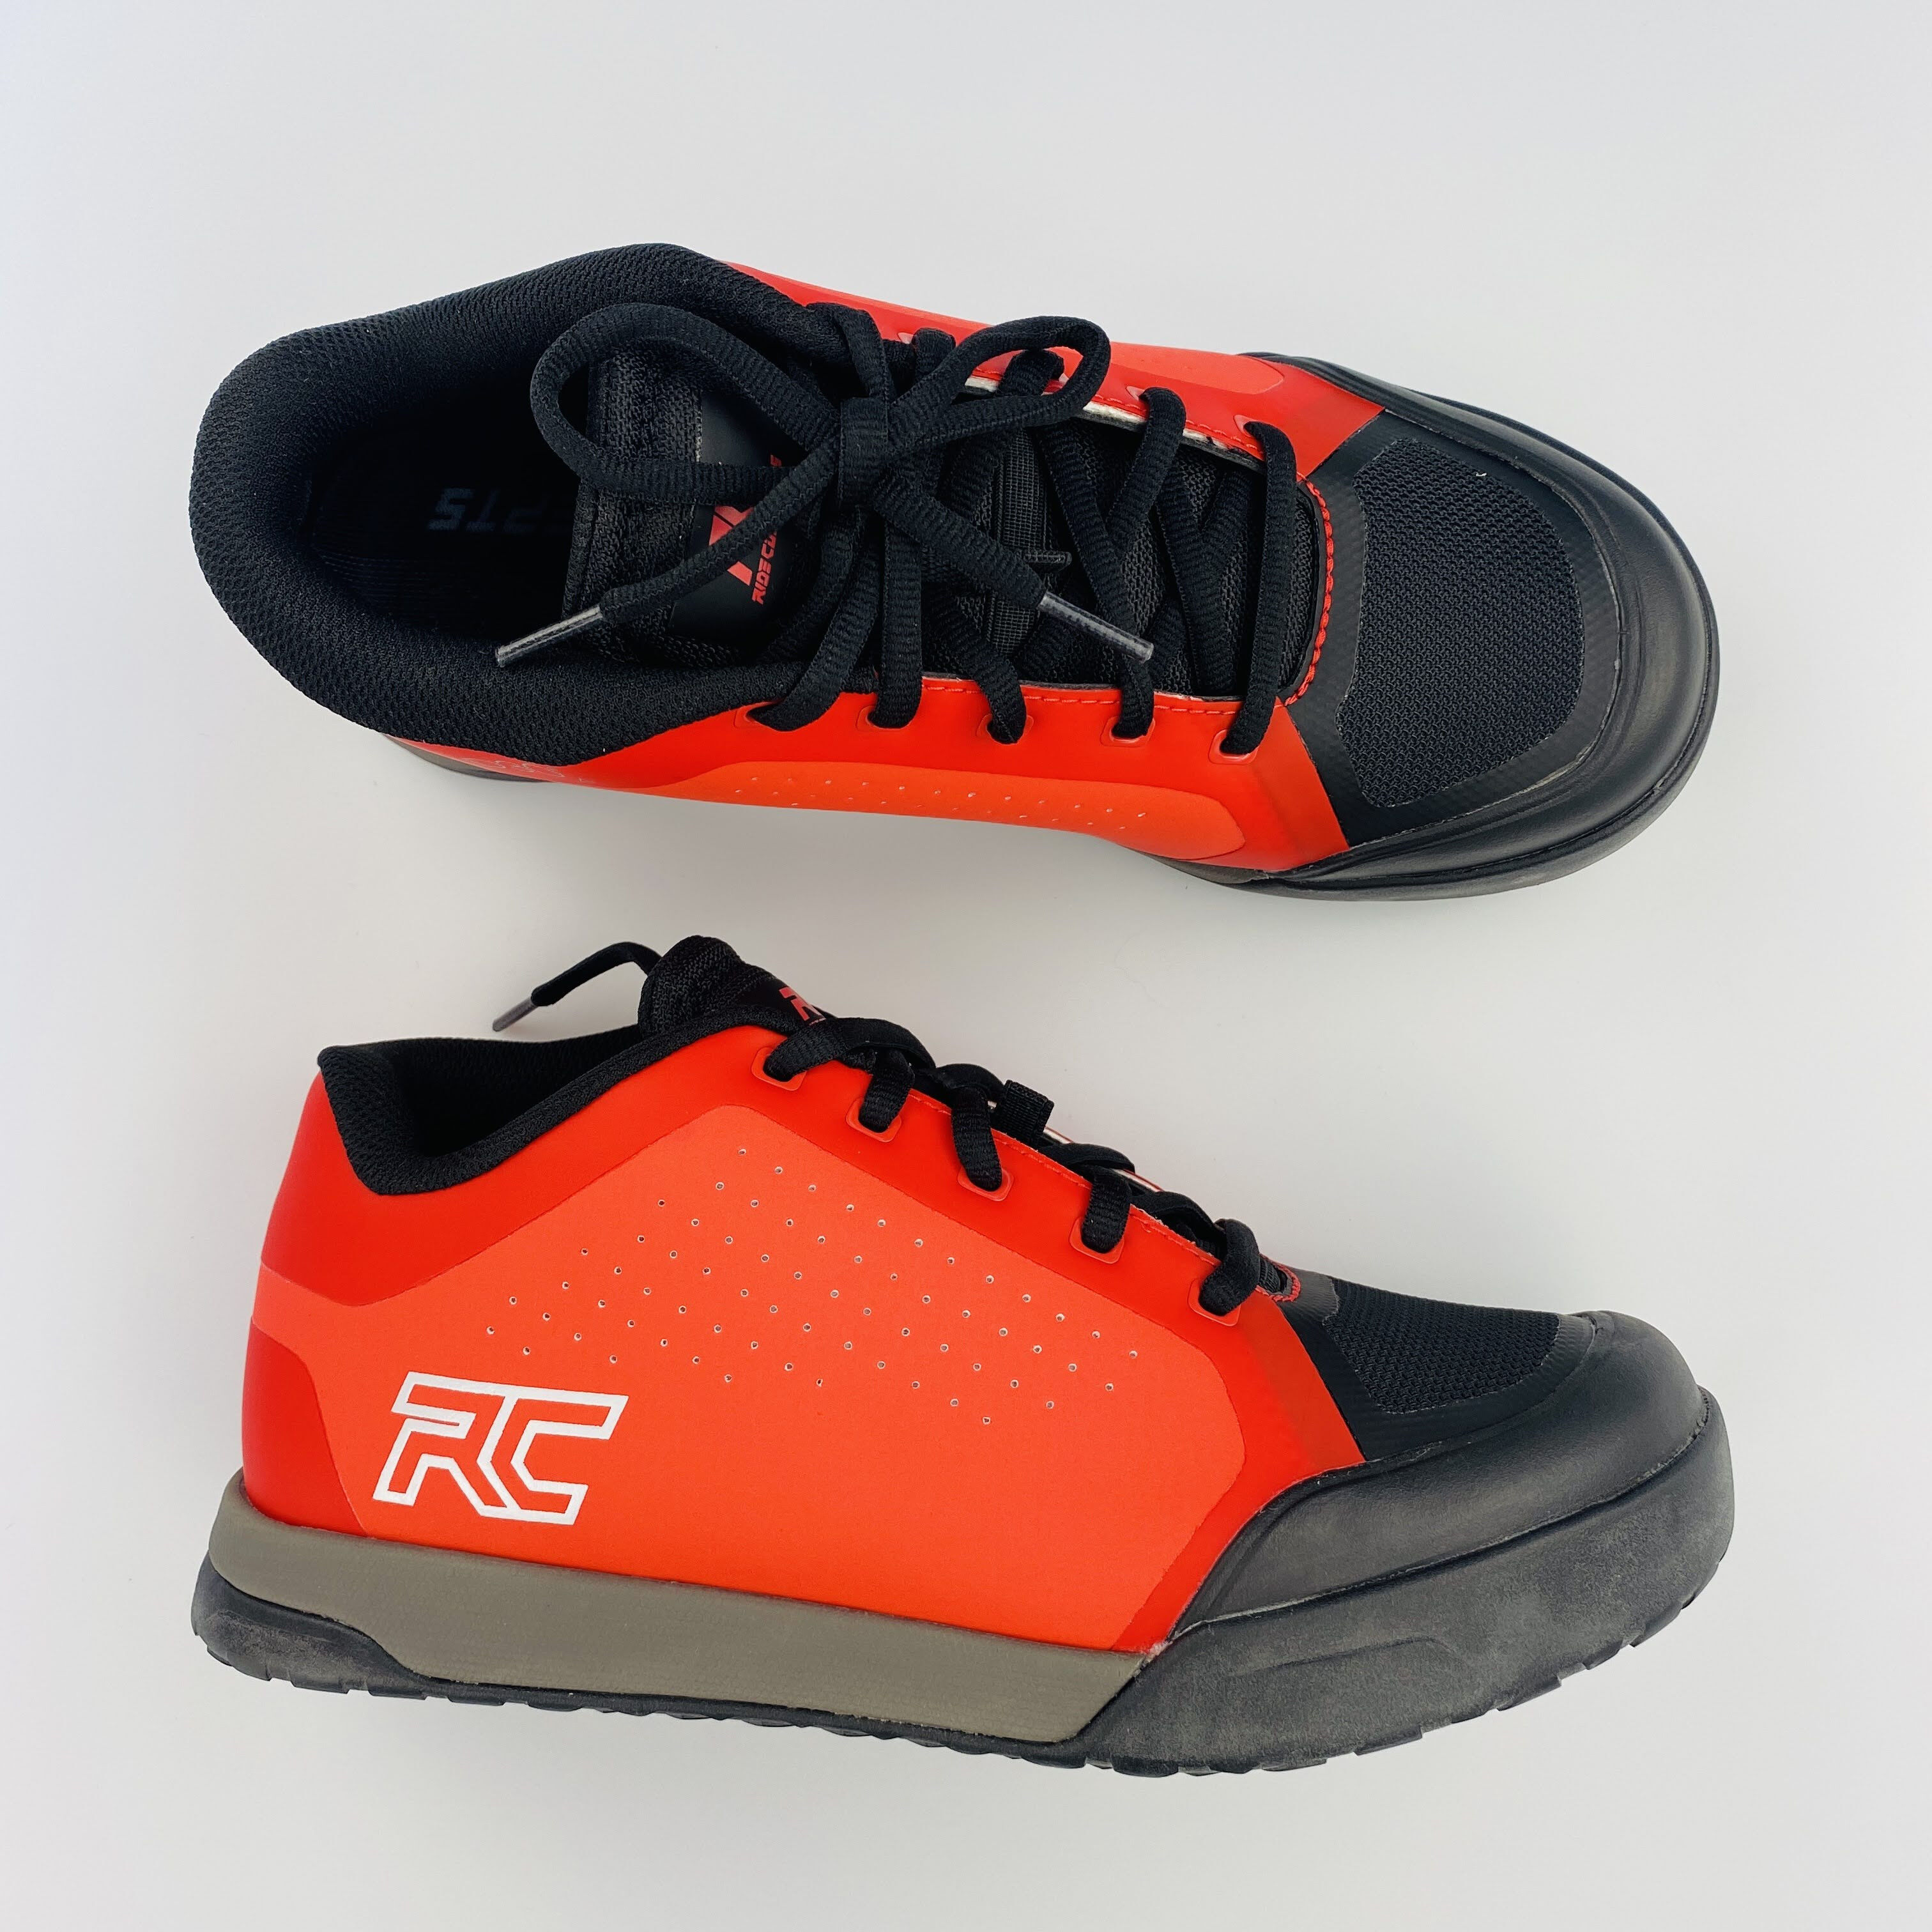 Ride Concepts Powerline - Seconde main Chaussures vélo homme - Rouge - 42 | Hardloop